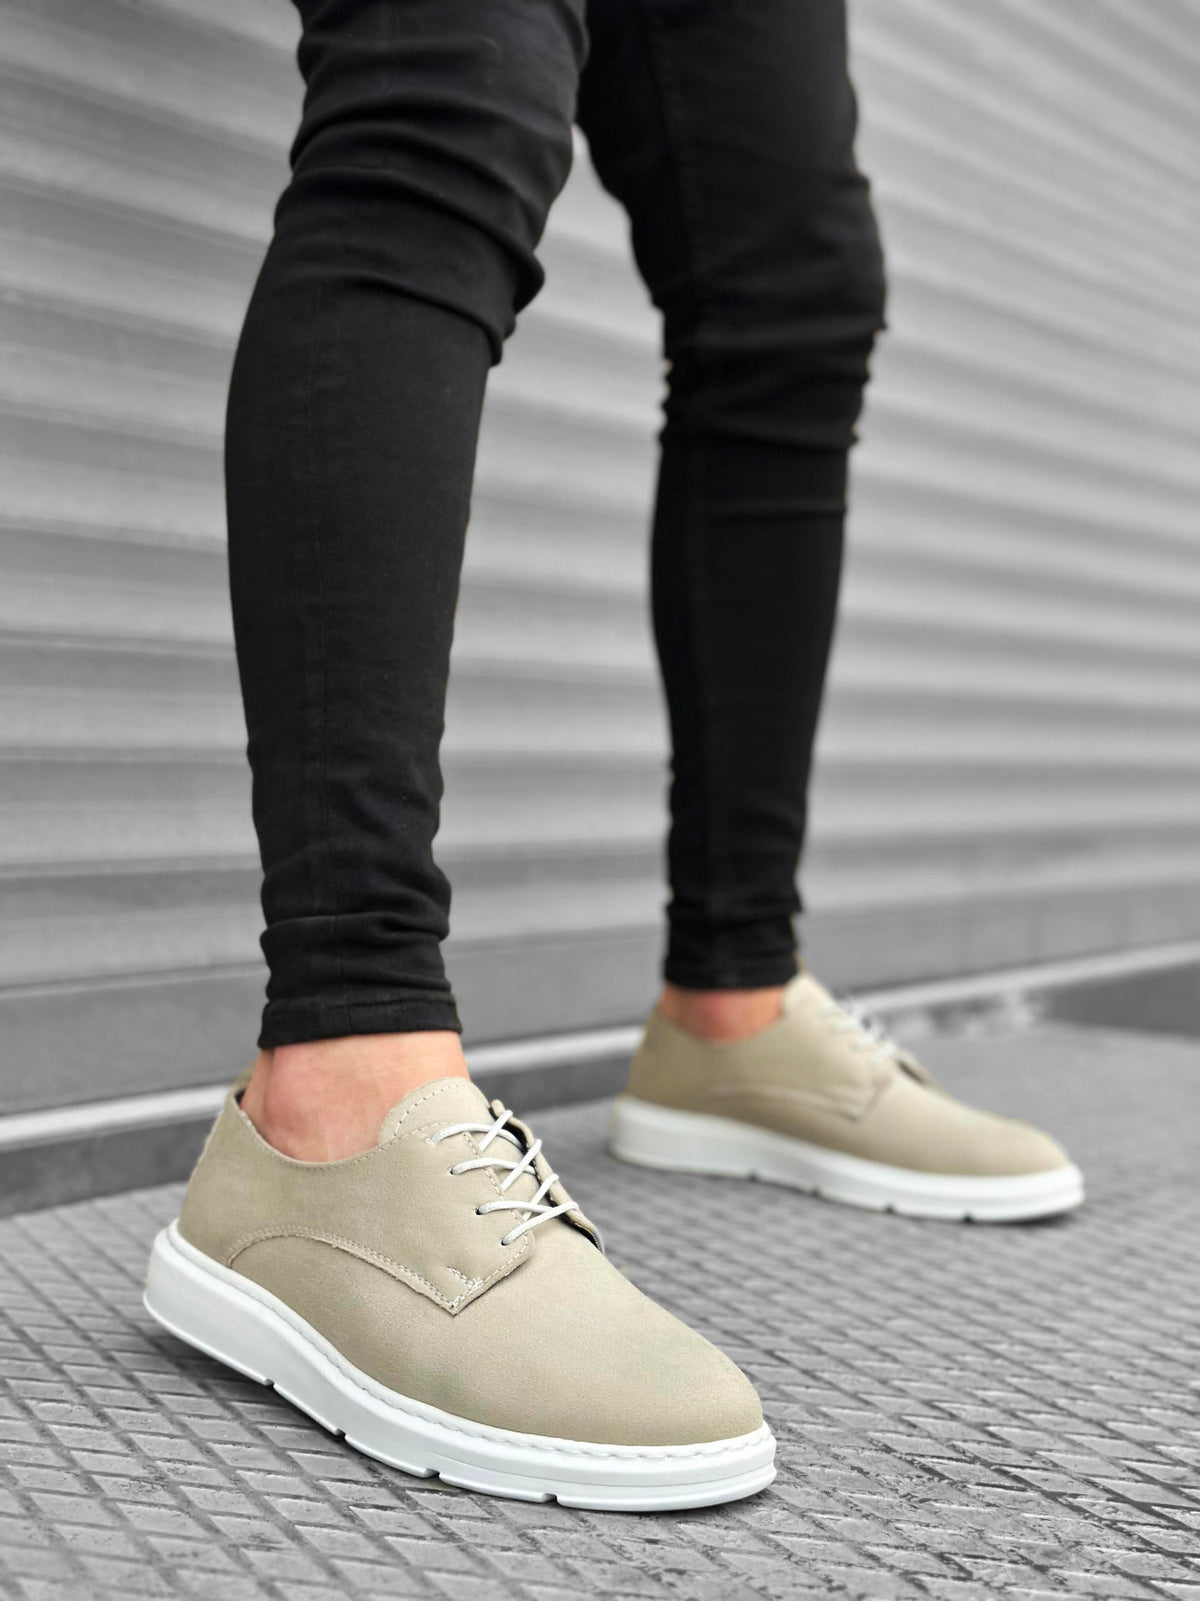 BA0003 Lace-Up Suede Classic Cream White High Sole Casual Men's Sneakers Shoes - STREET MODE ™